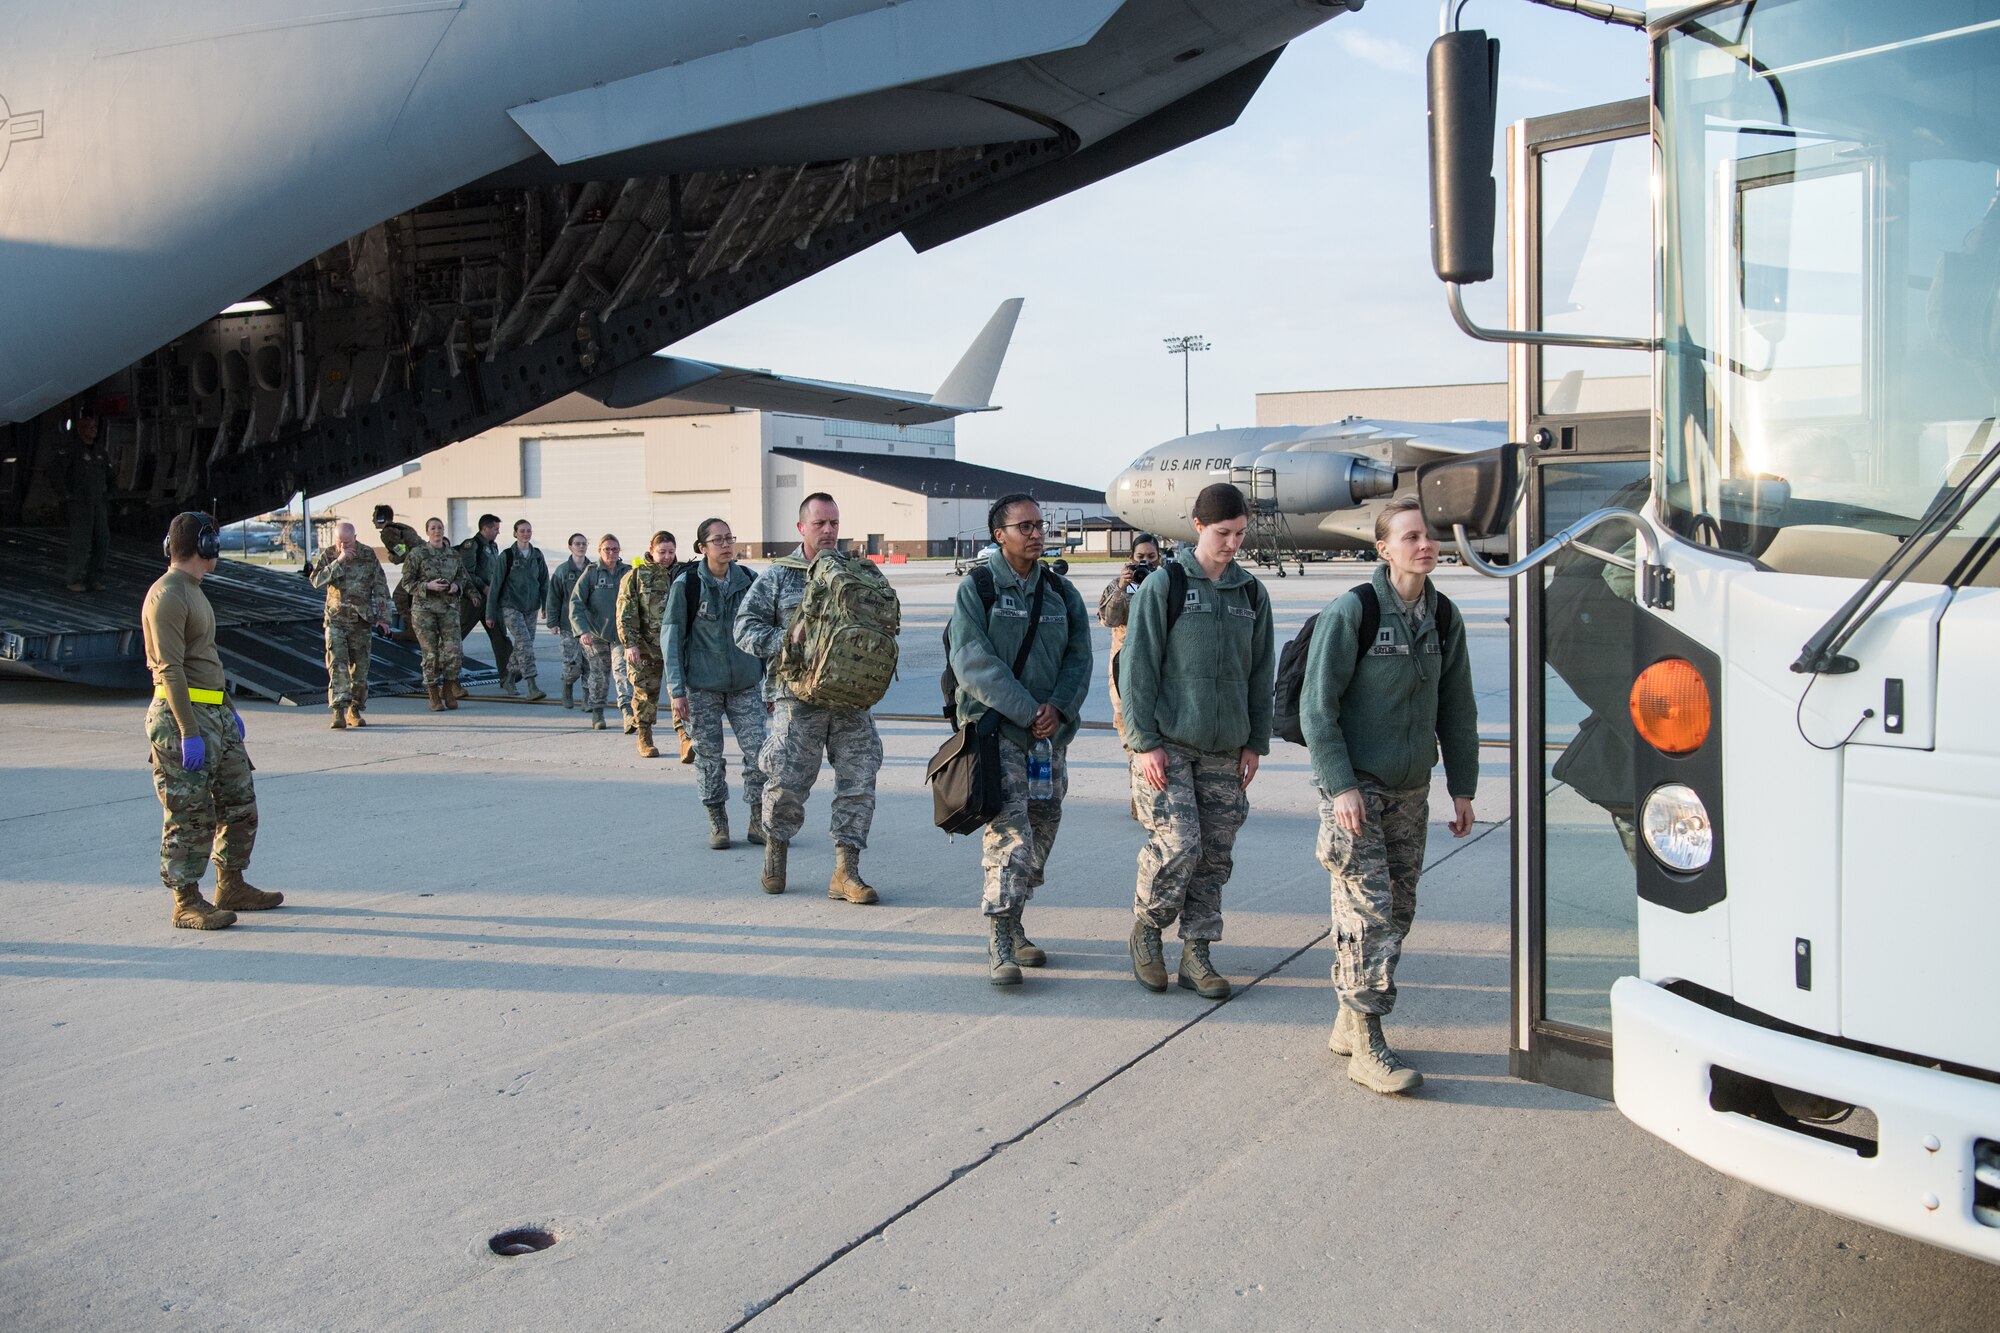 U.S. Reserve Citizen Airmen with medical experience offload from a C-17 Globemaster III with the 911th Airlift Wing at Joint Base McGuire-Dix-Lakehurst, N.J., on their way to support the residents of New York City in the fight against COVID-19, April 5, 2020.